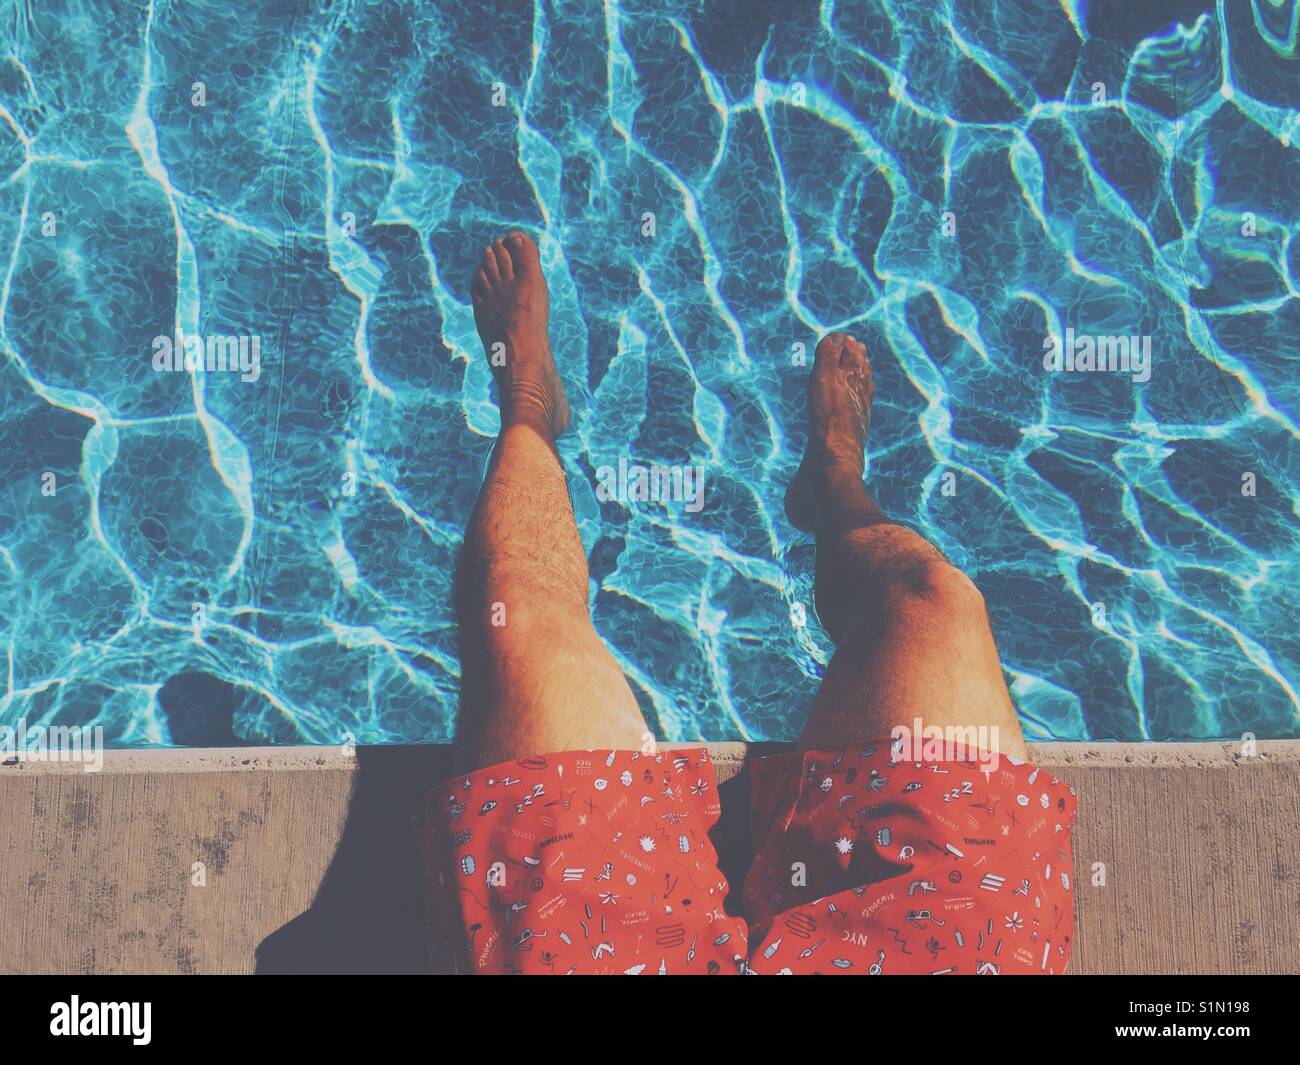 Areal view of the legs of a man sitting at the edge of a swimming pool on a hot day. Stock Photo